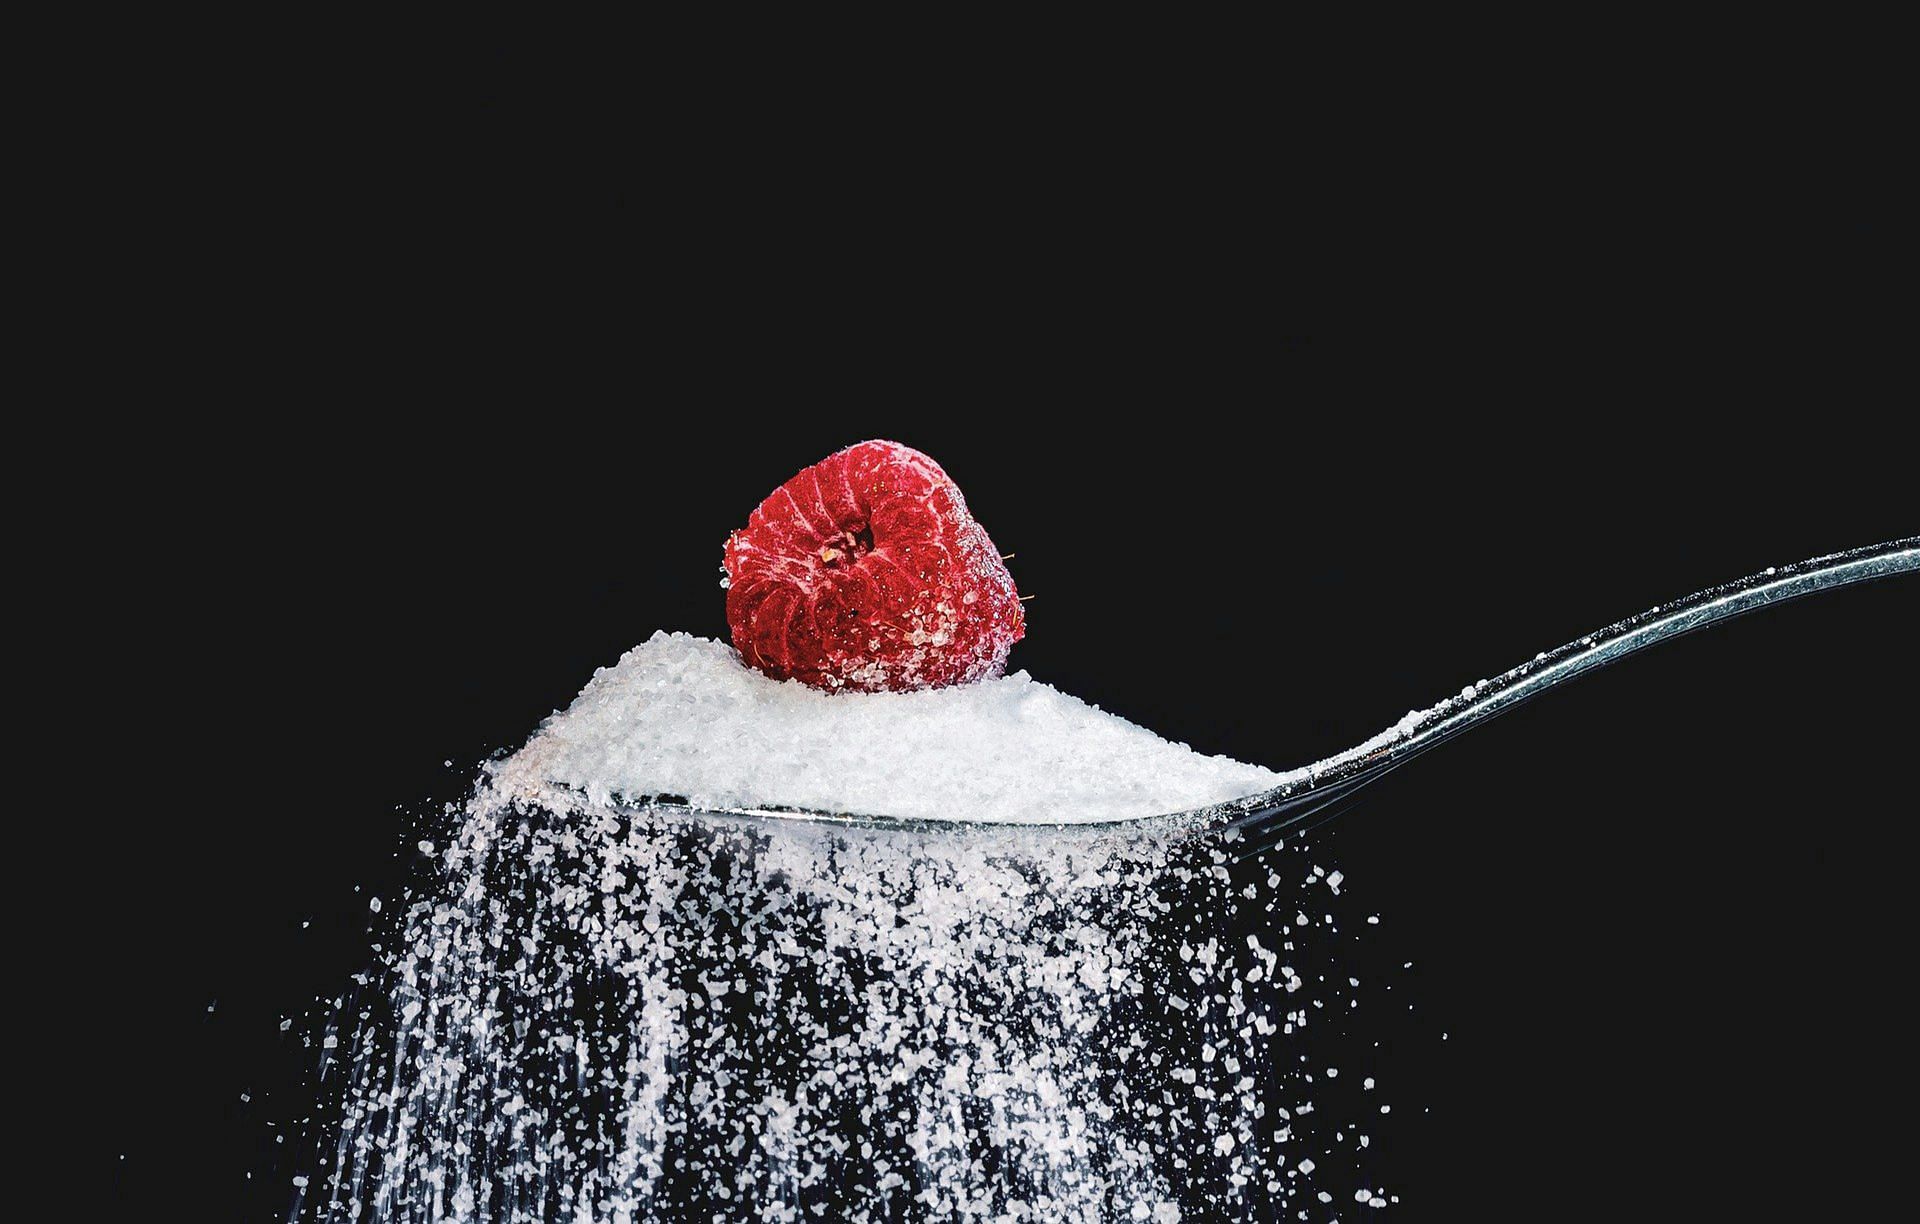 Let us find out about how to stop eating sugar ! (Image by Myriam Zilles/Unsplash)